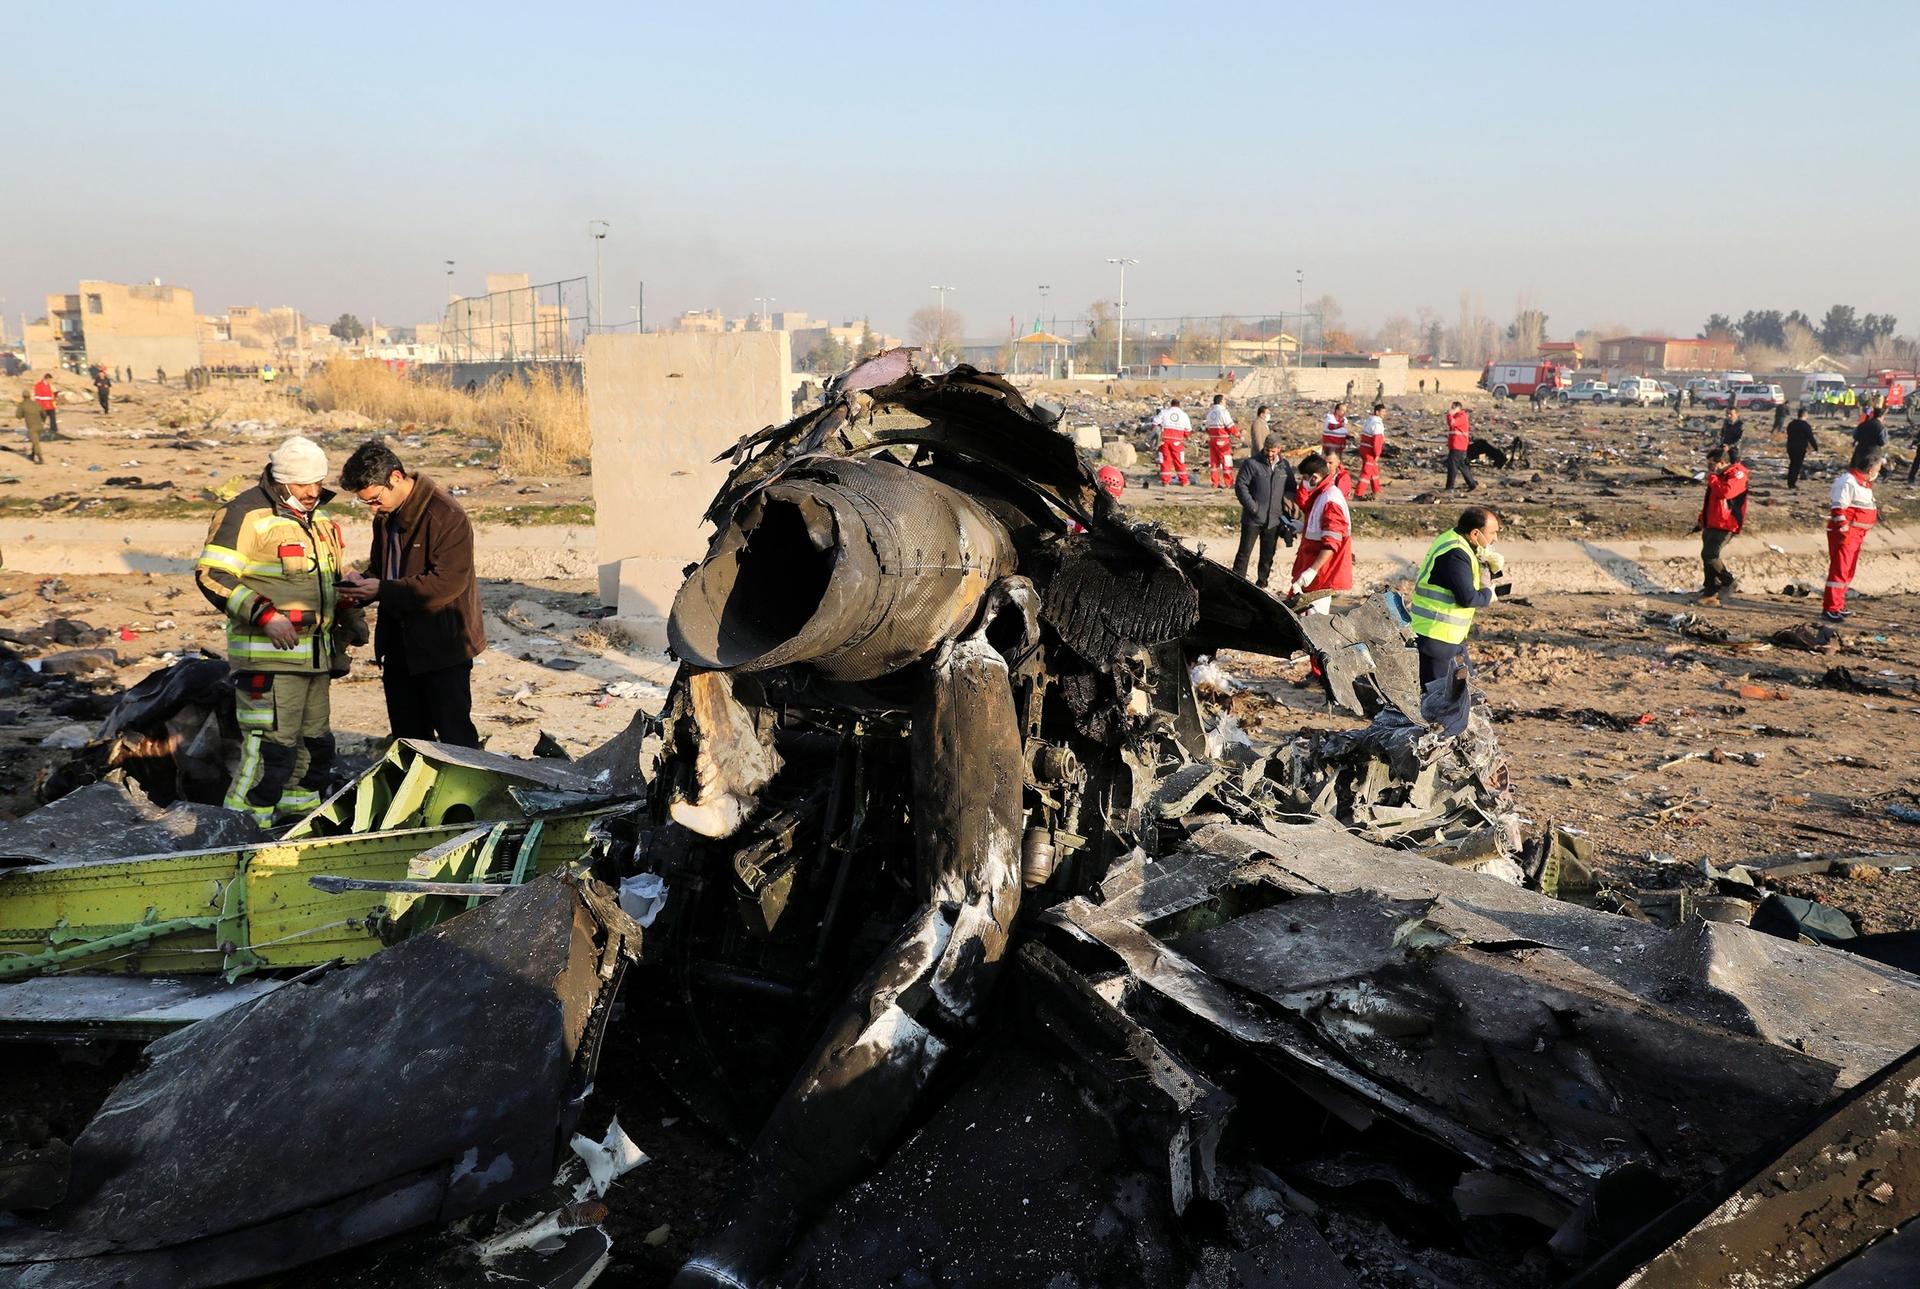 The charred remains of a passenger aircraft is shown with several inspectors shown on the scene in the distance.